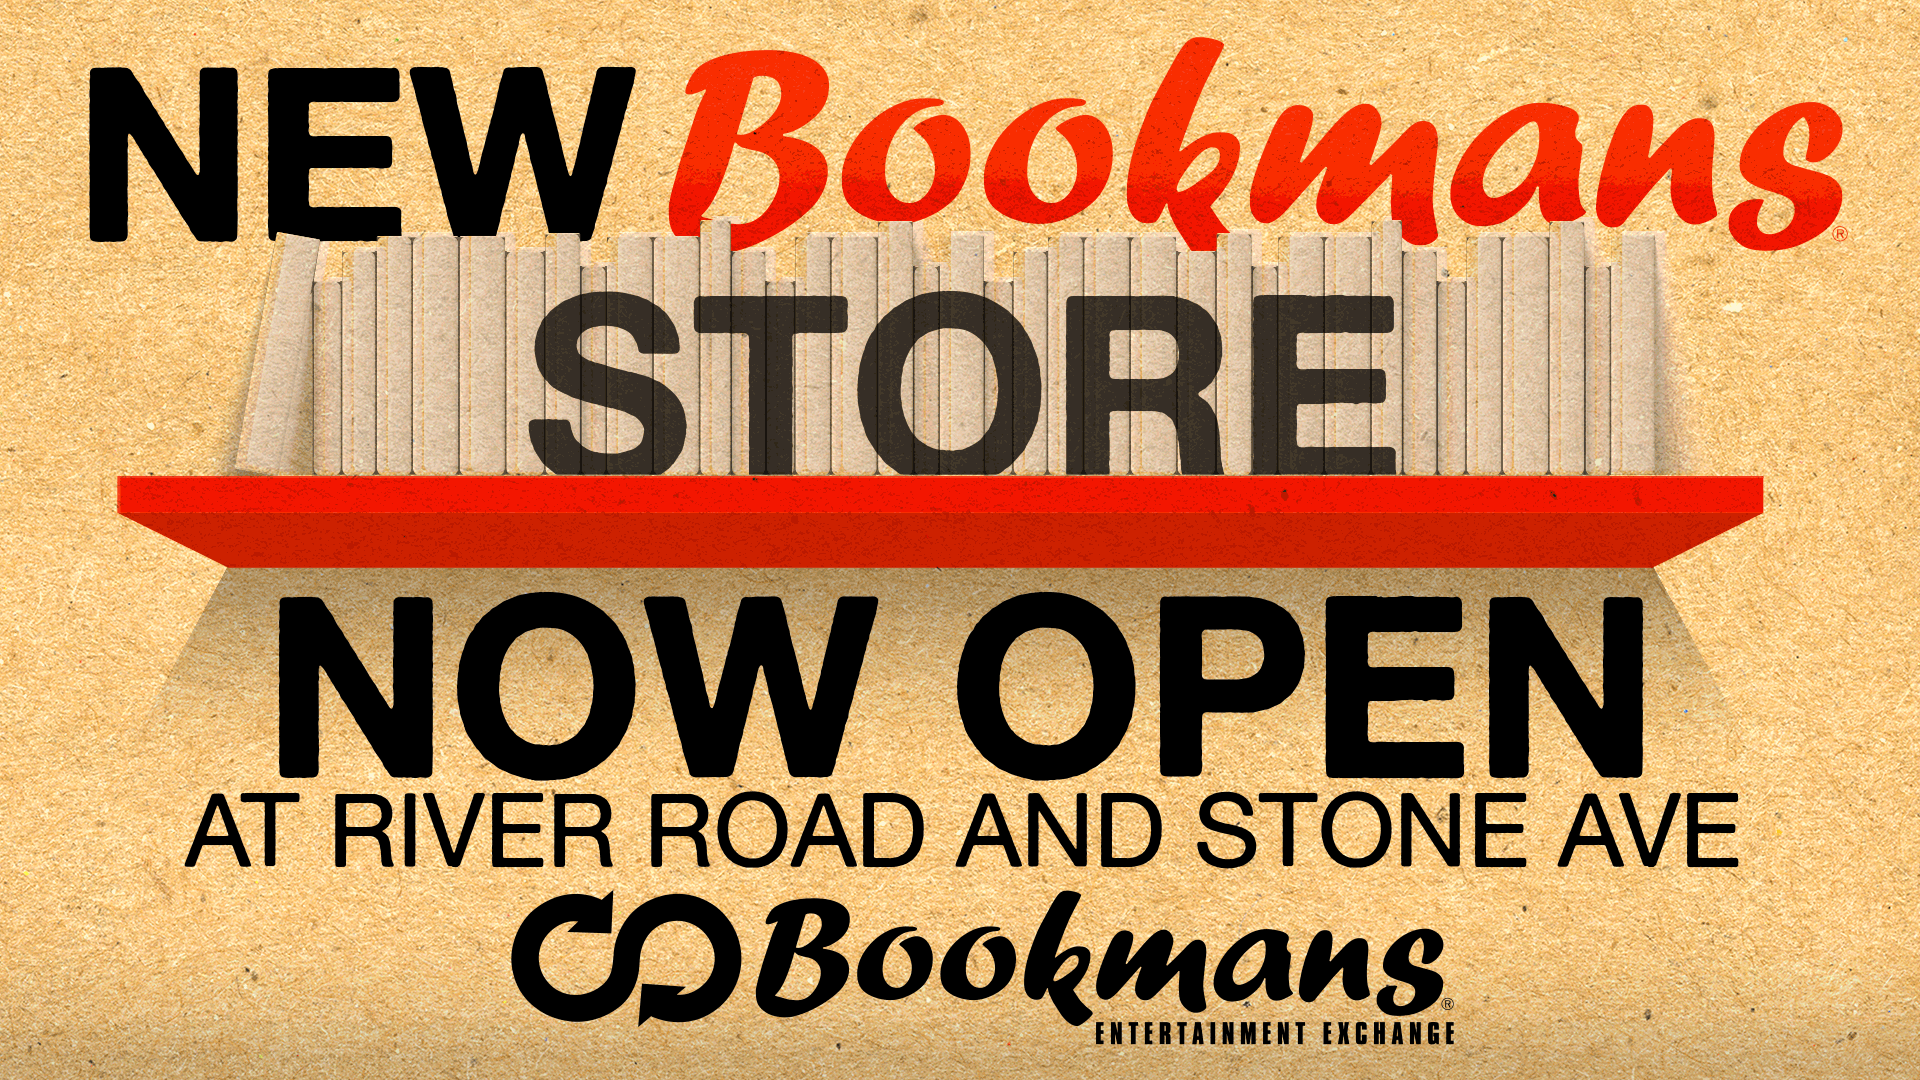 Sign reading NEW Bookmans Store Now Open at River Road and Stone Ave with the bookmans logo